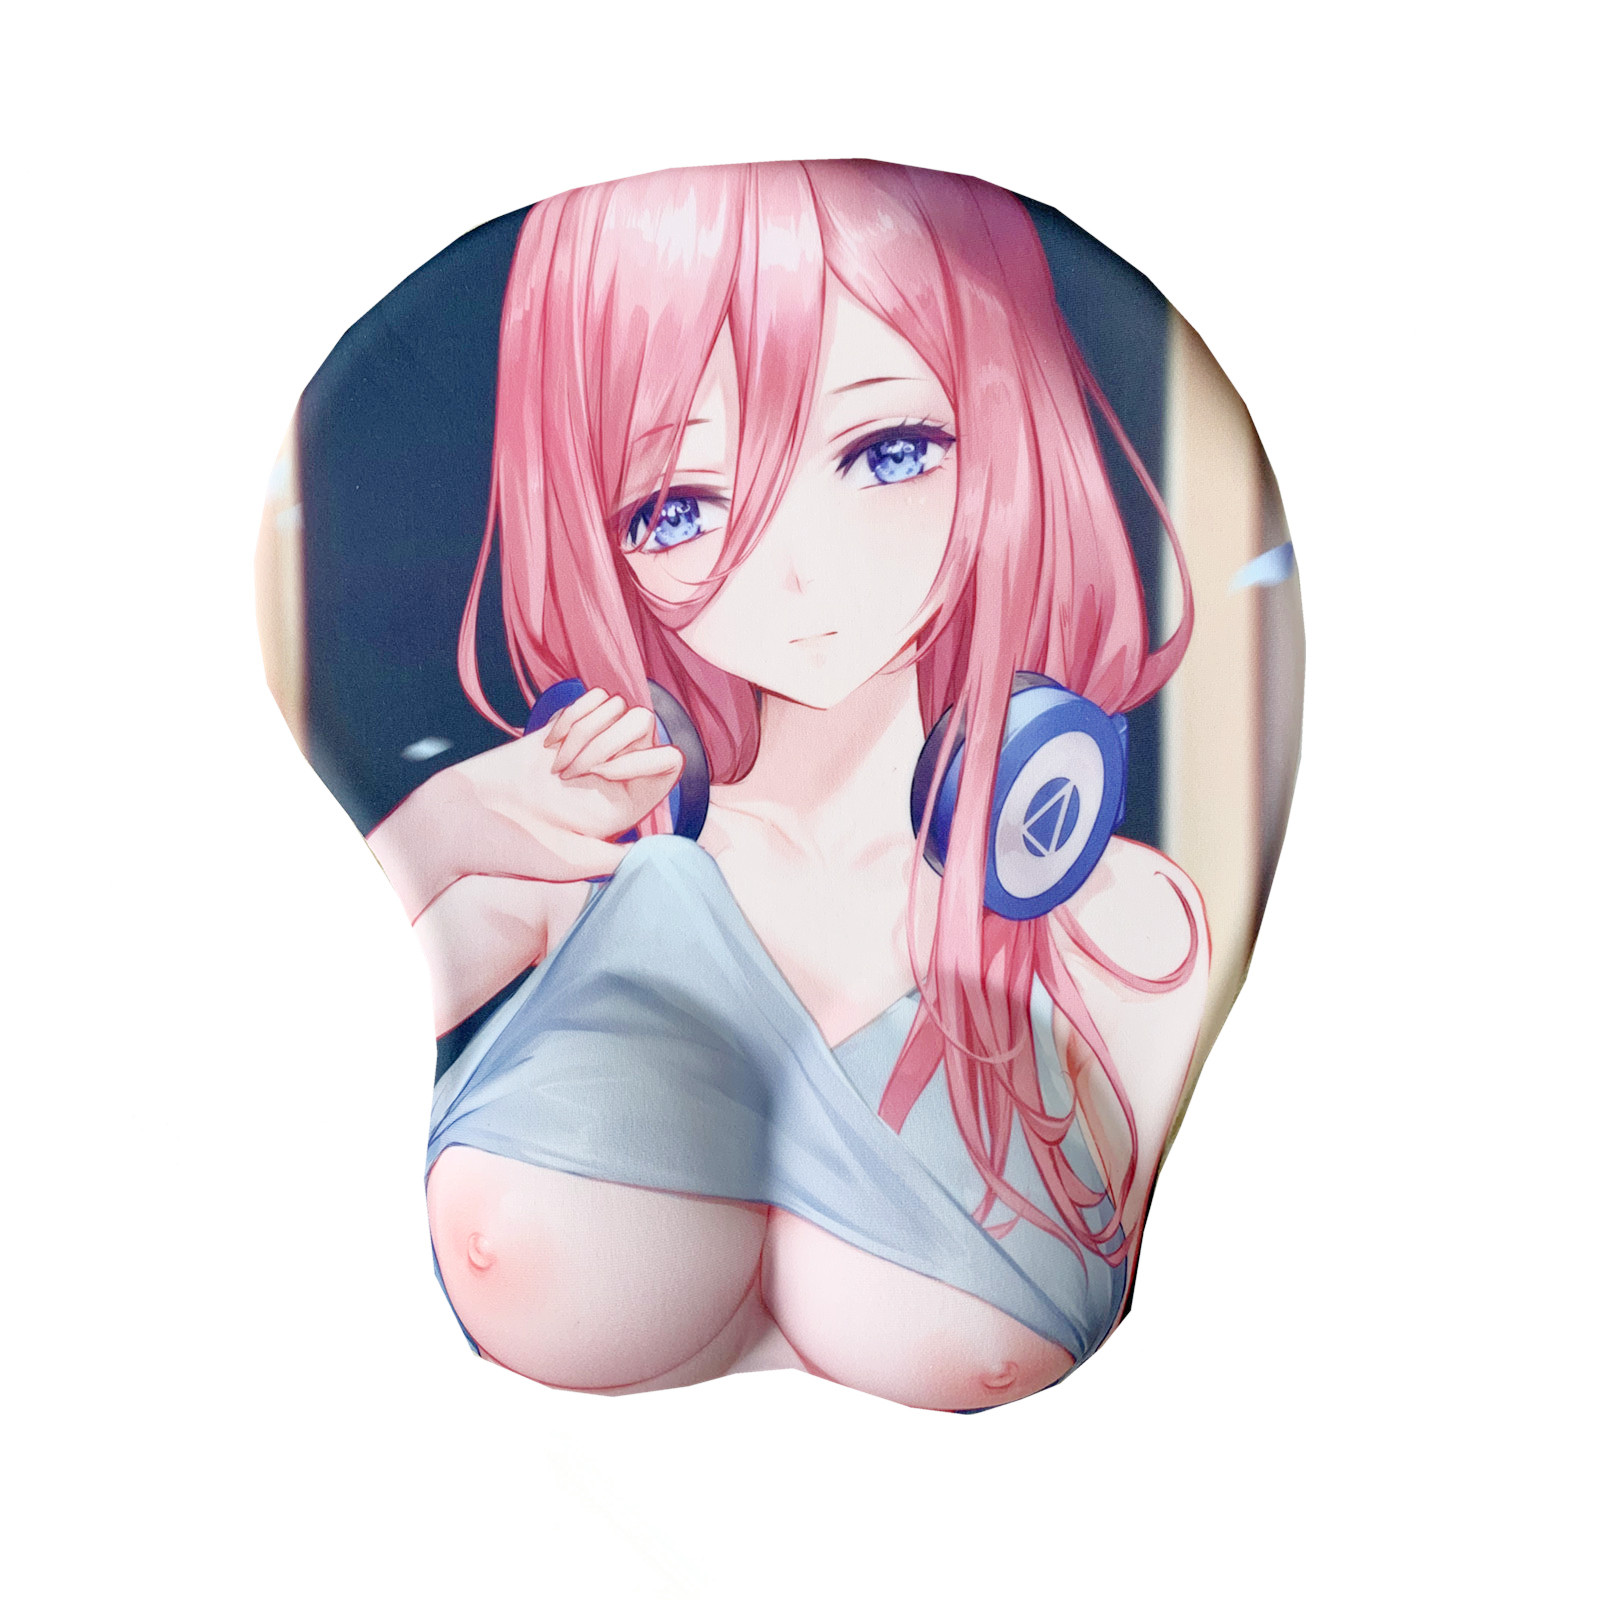 Nakano Miku The Quintessential Quintuplets Anime 3D Mouse Pads Soft Breast Sexy Butt Wrist Rest Oppai